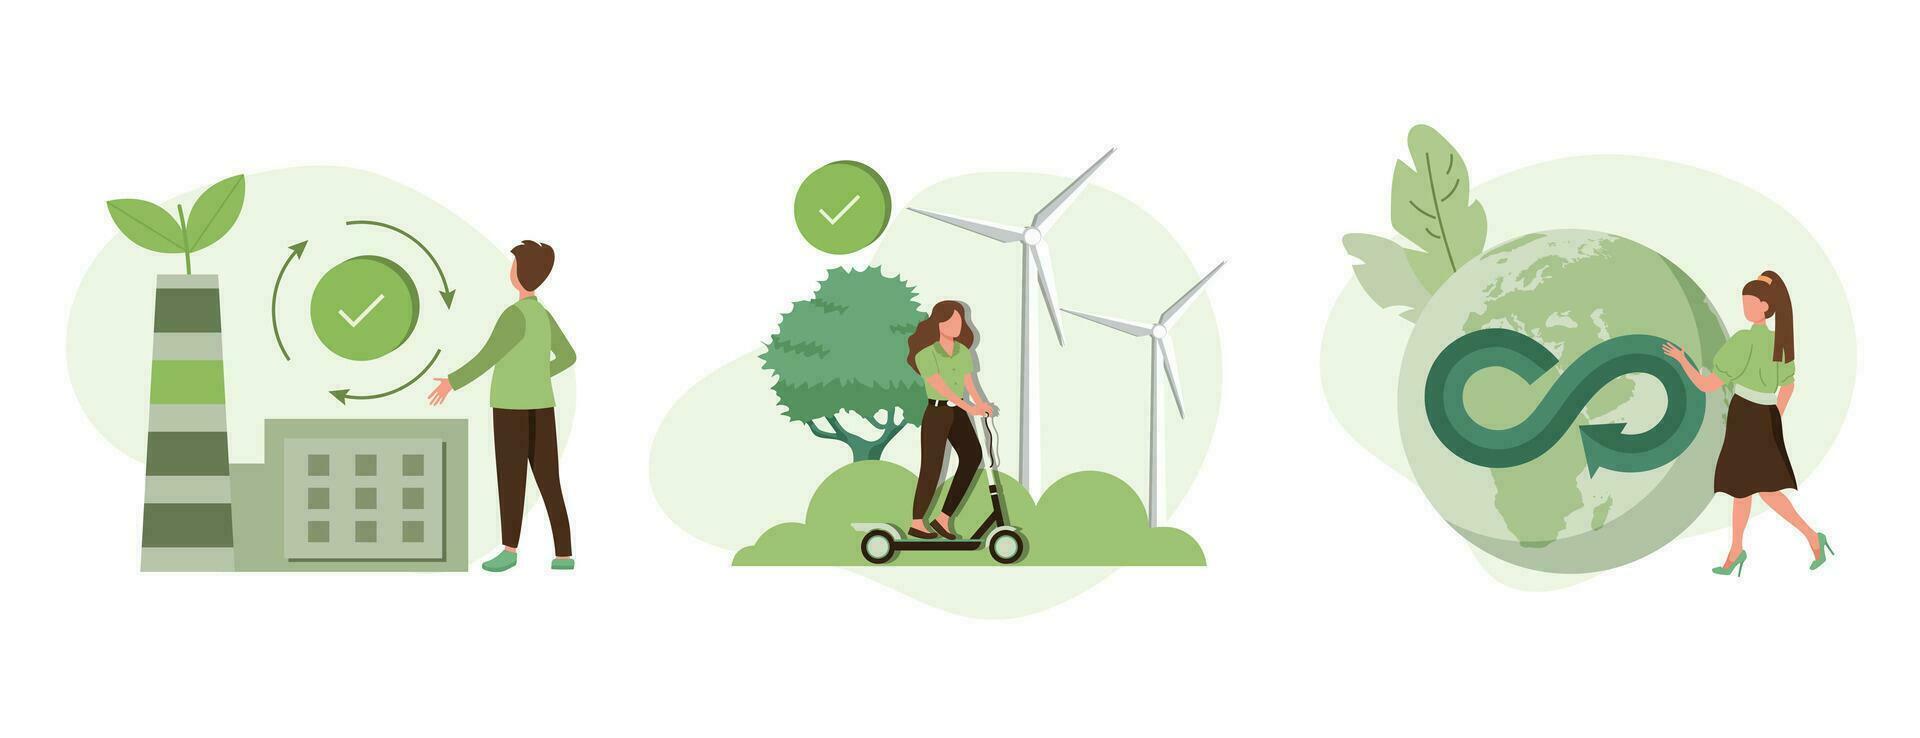 Circular economy illustration set. Sustainable economic growth with renewable energy and natural resources. Green energy, sustainable industry and manufacturing concept. Vector illustration.